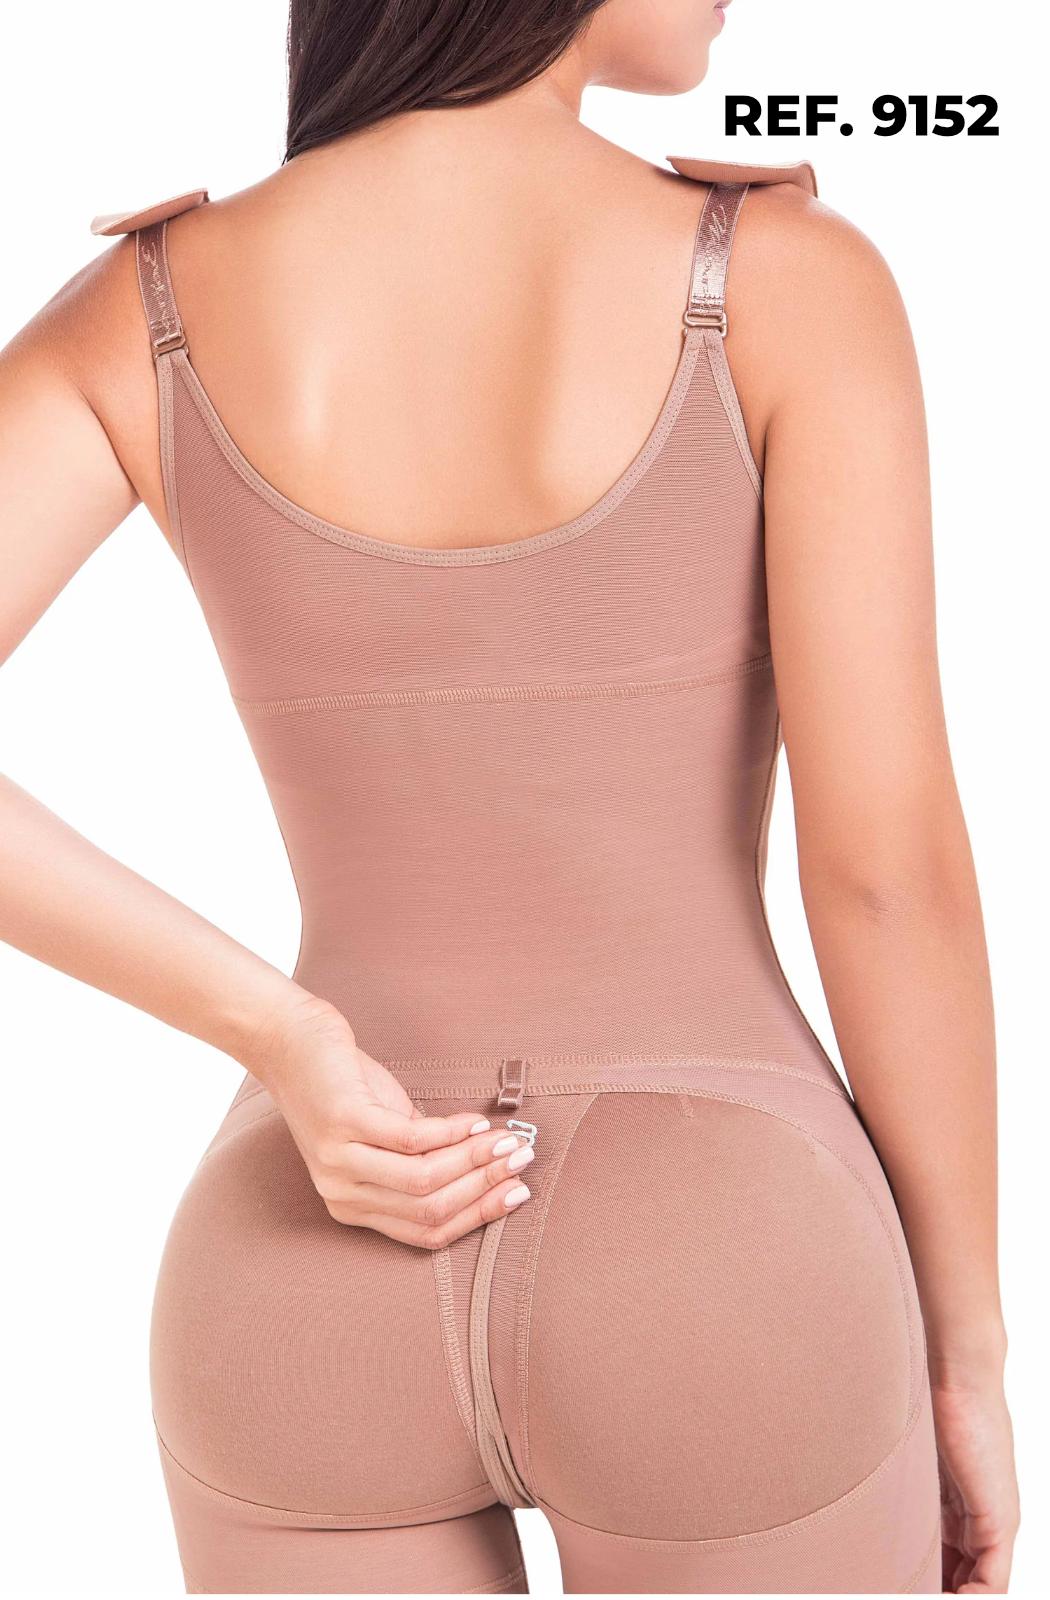 Knee Girdle for Daily Use or Postpartum